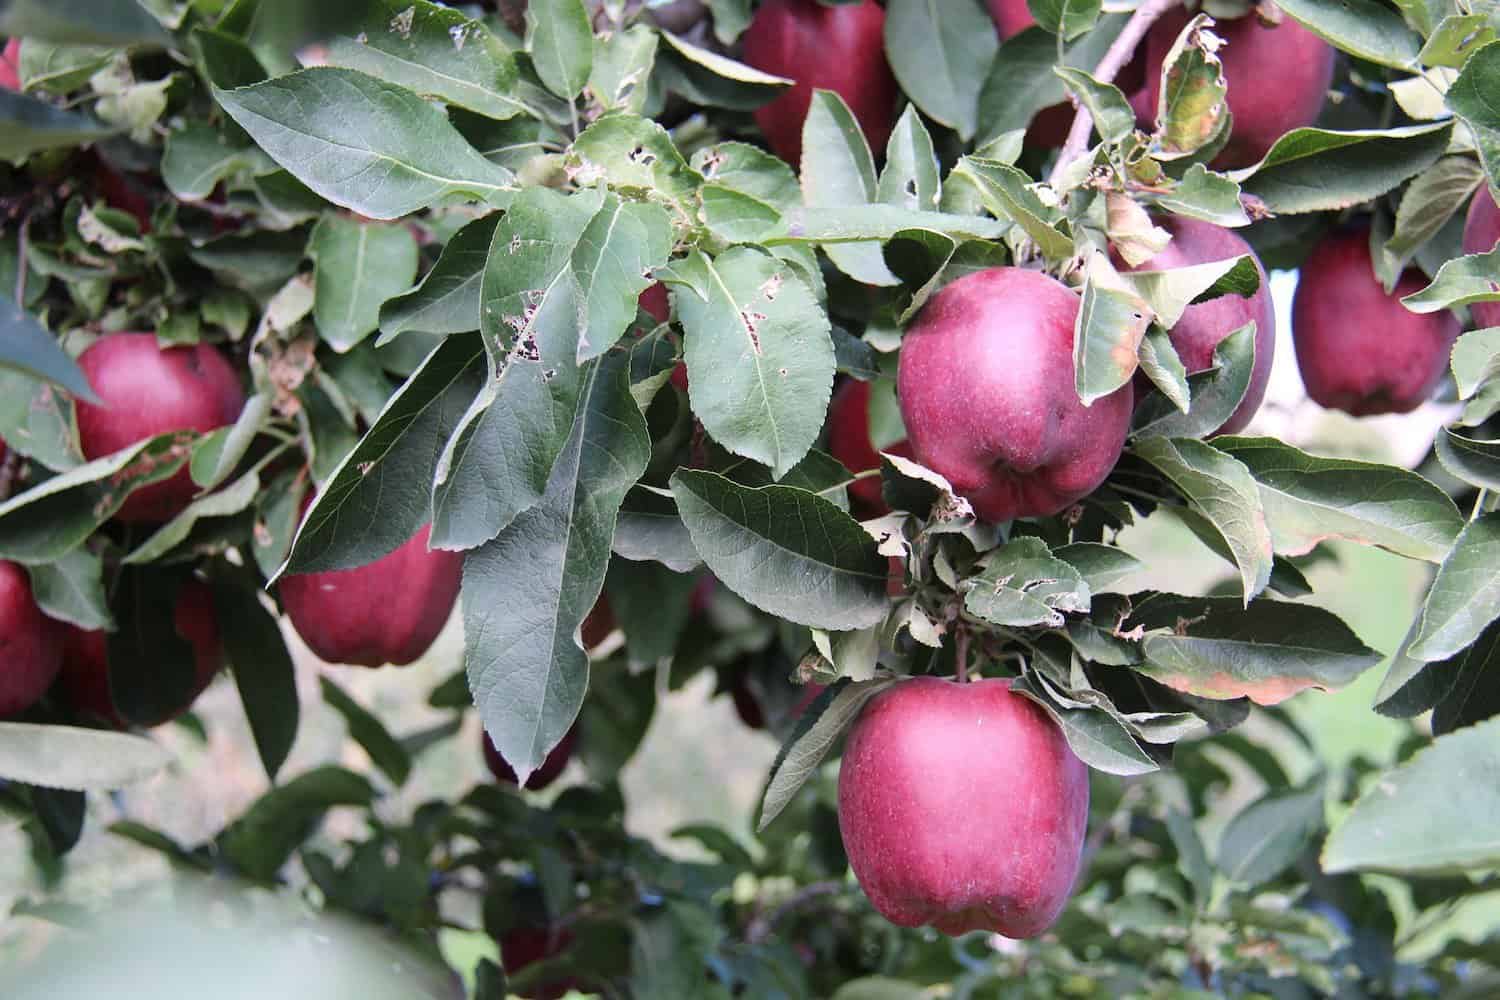 Red delicious apples on tree | home for the harvest